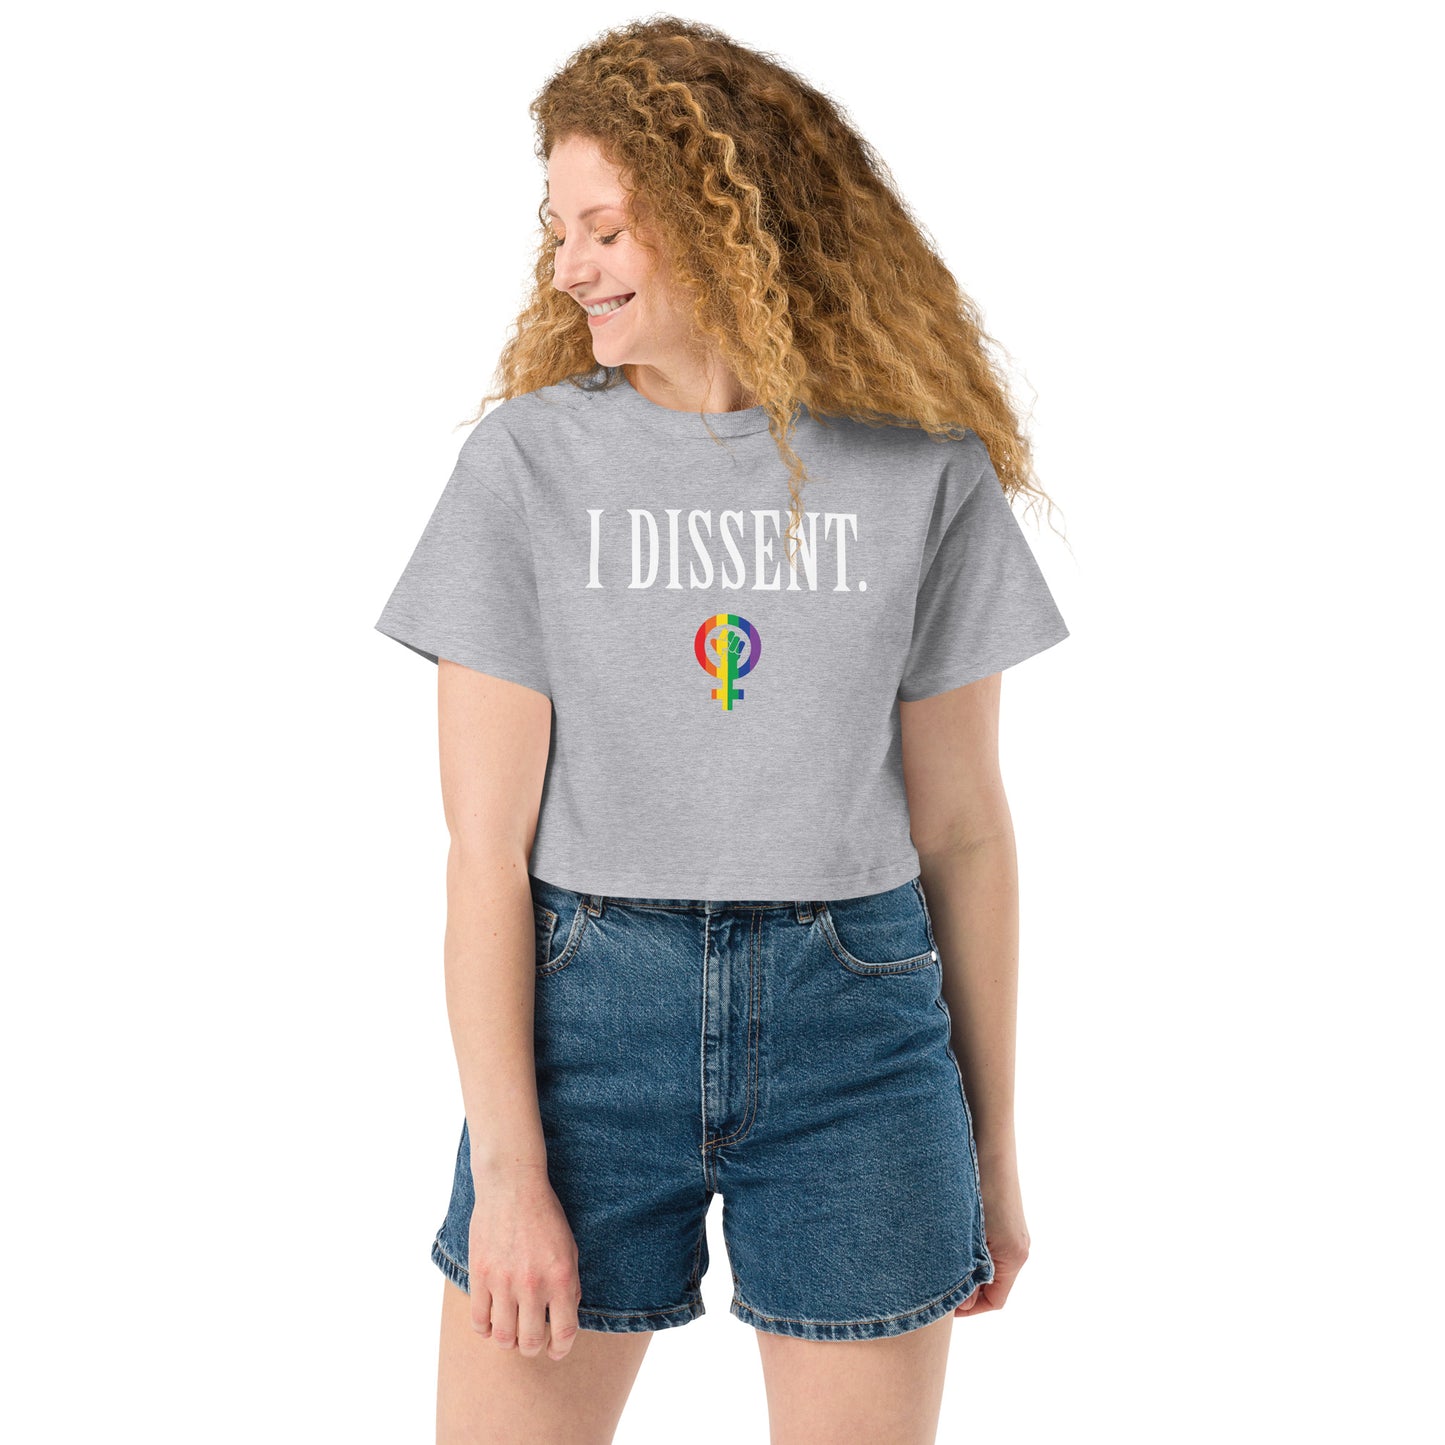 I Dissent. Cropped Tee- Women's size- Pride Edition!